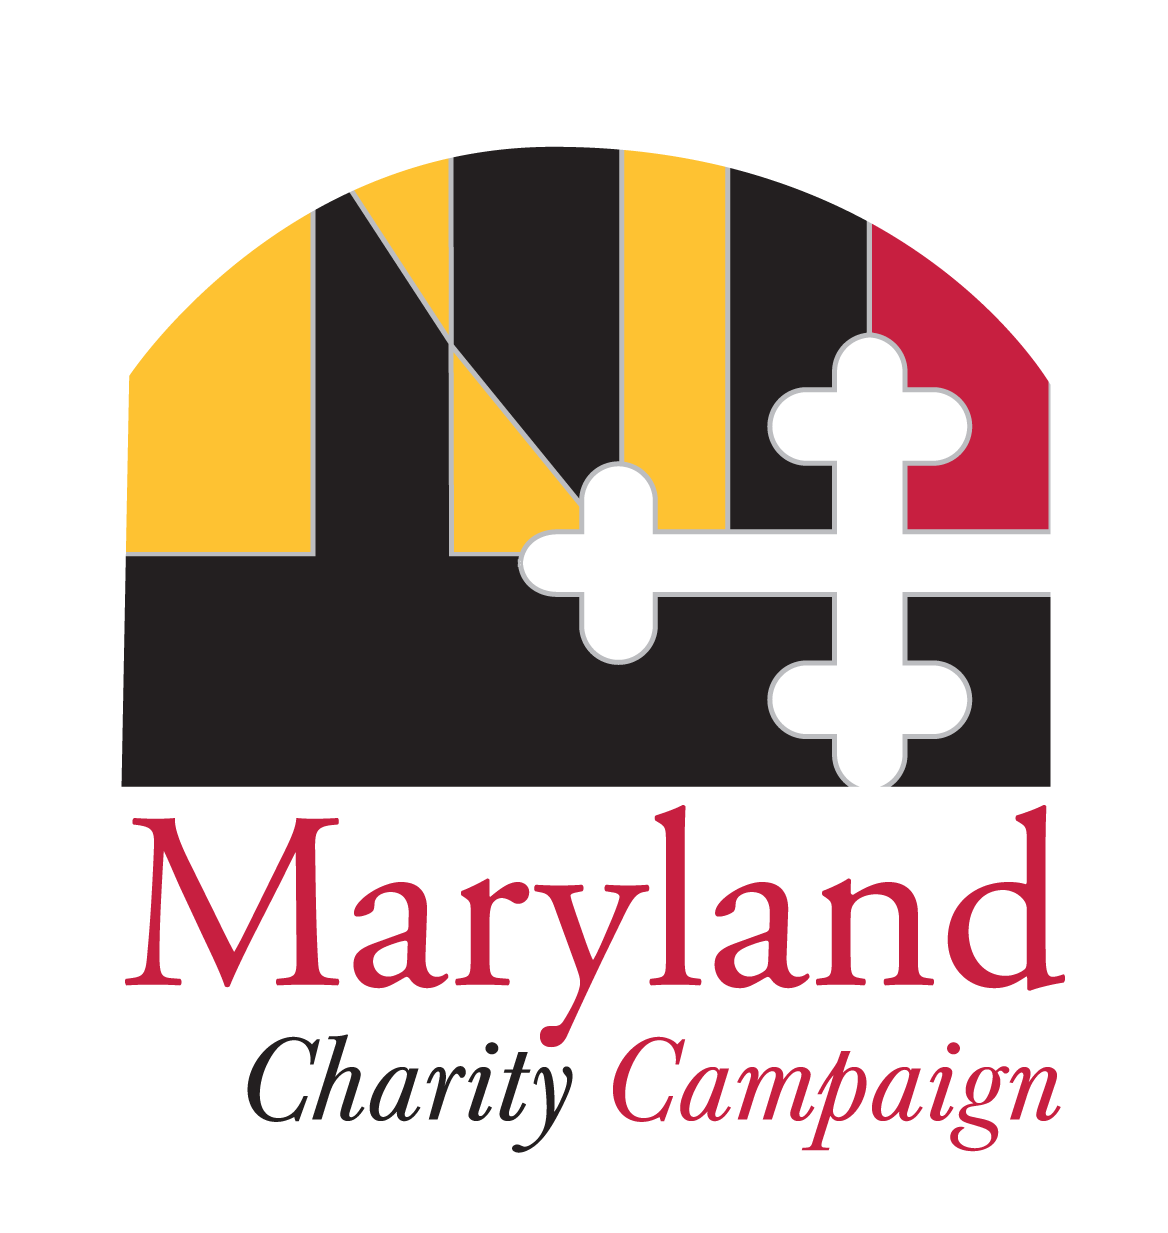 Maryland Charity Campaign Logo